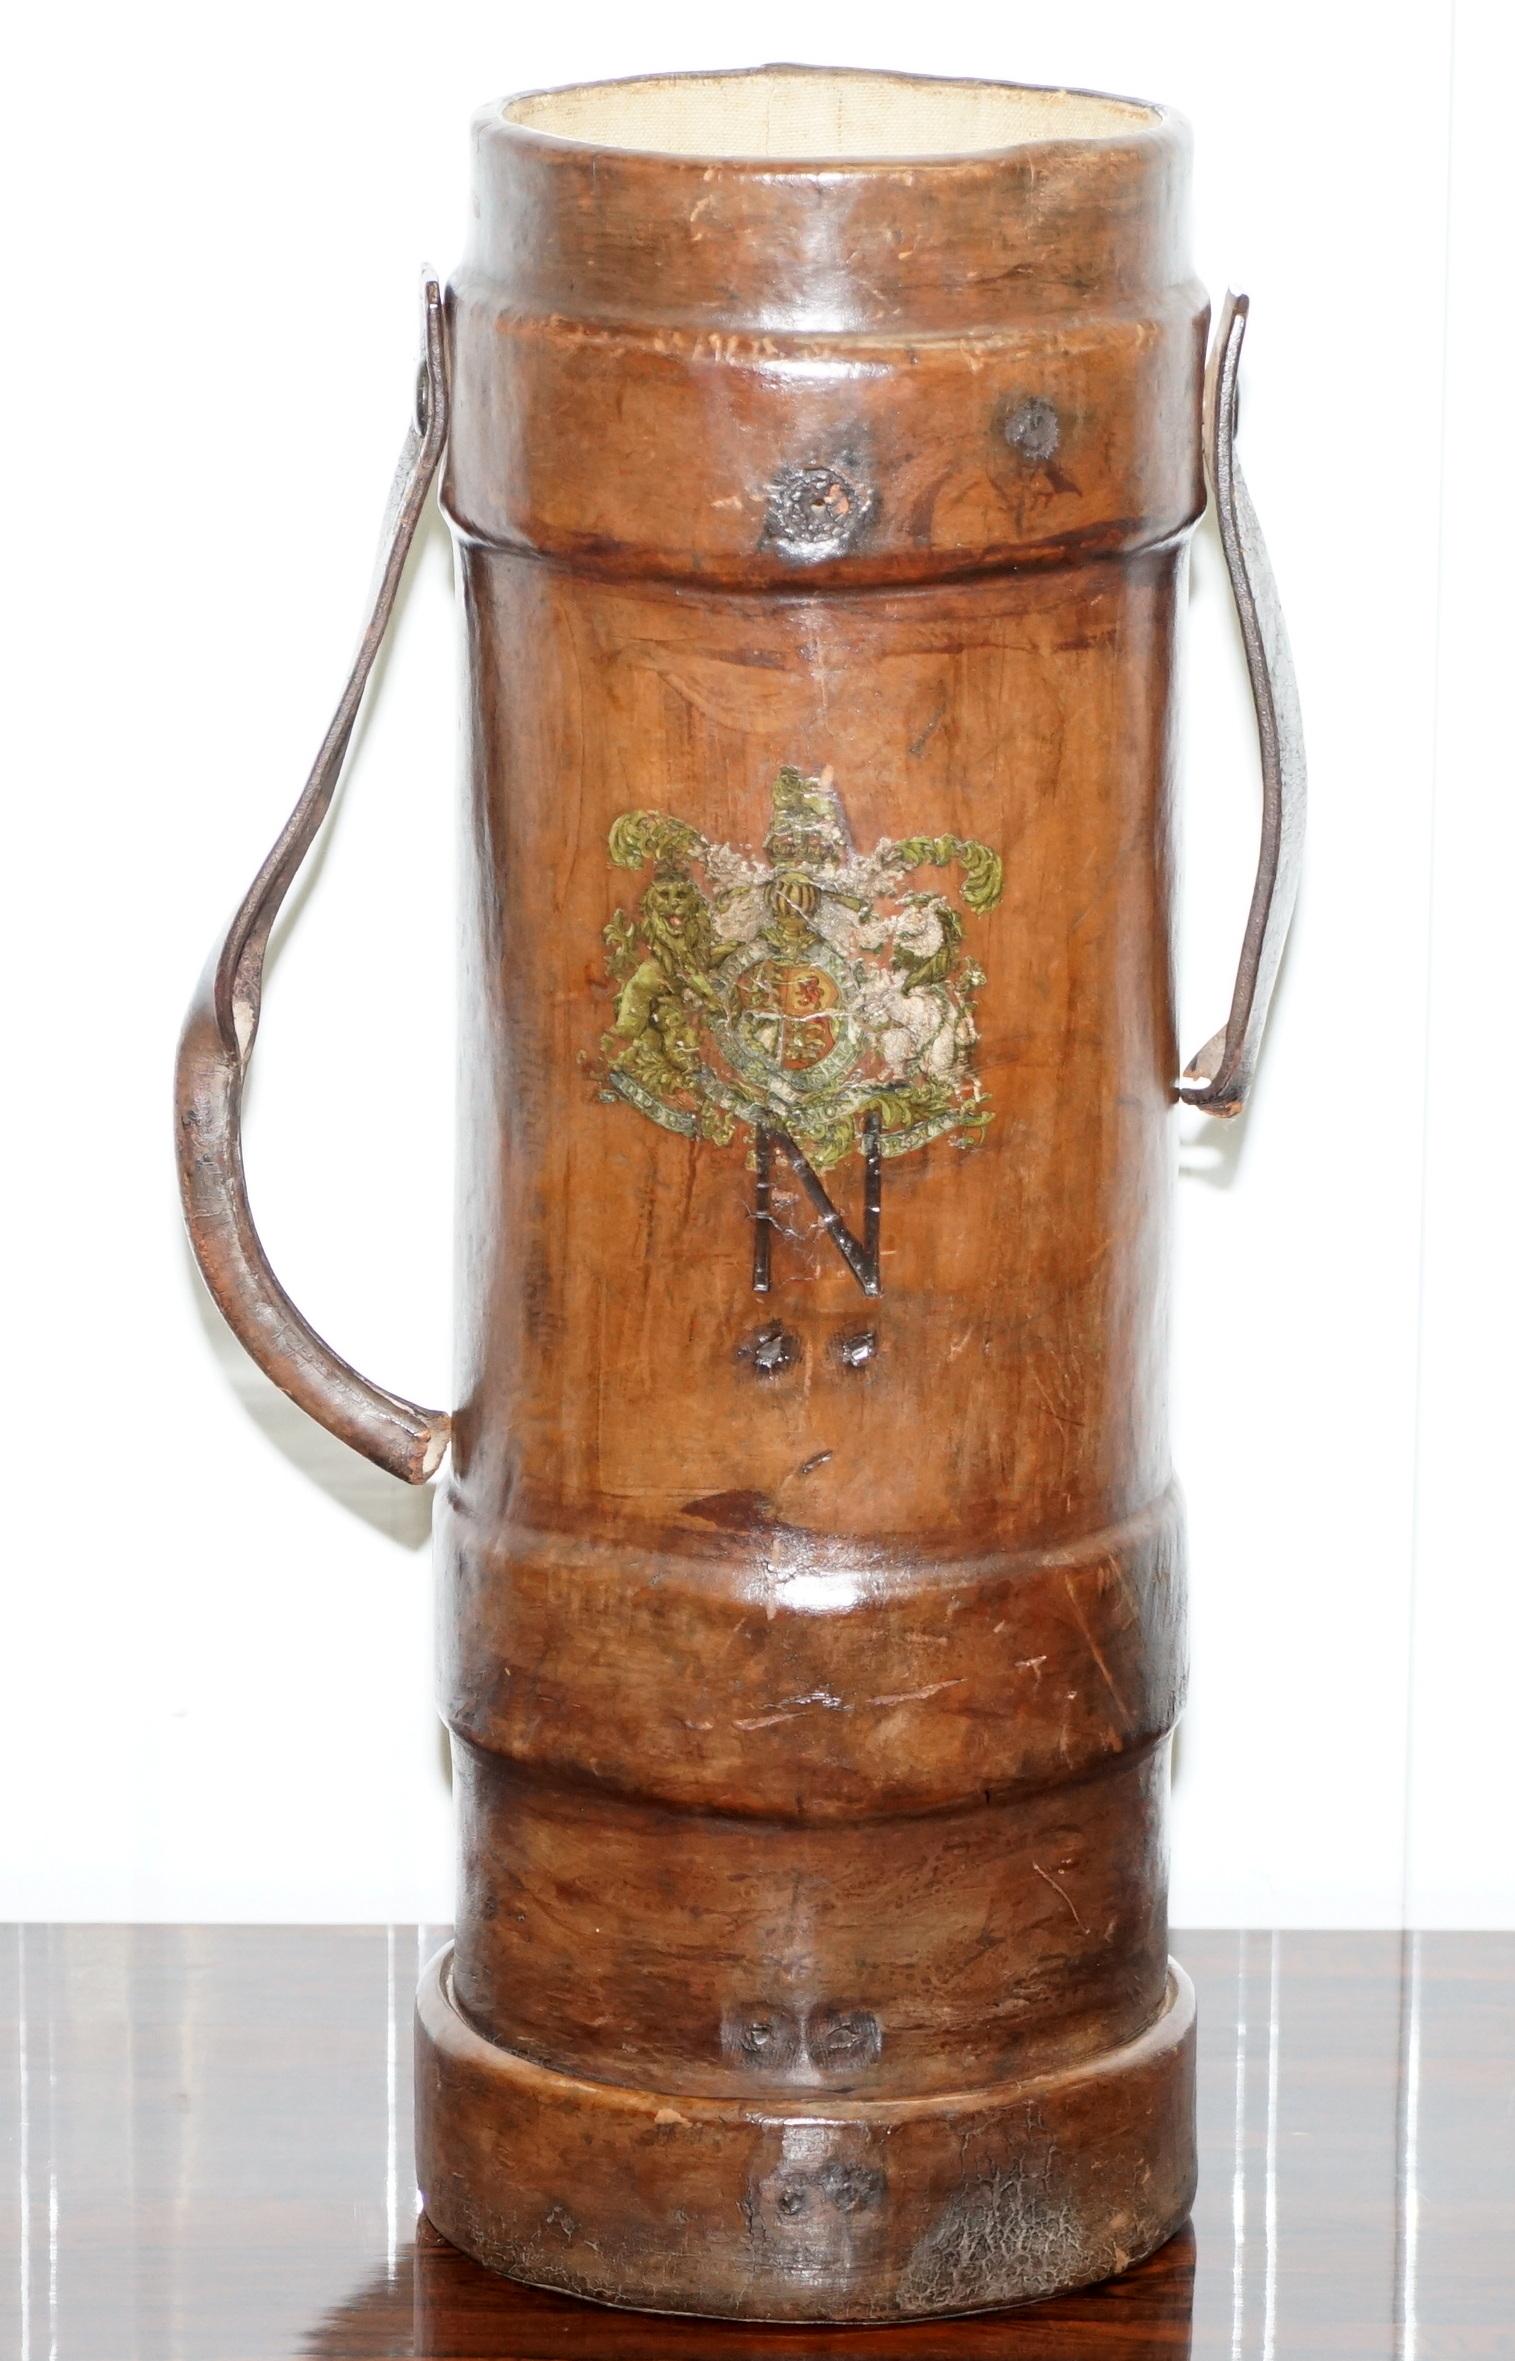 We are delighted to offer for sale this stunning and really very rare WWI British Royal Navy shot bucket fully stamped to the base NO.58 III BH & G.Ltd in leather with the Royal Armorial crest

A good looking and well made decorative piece, used